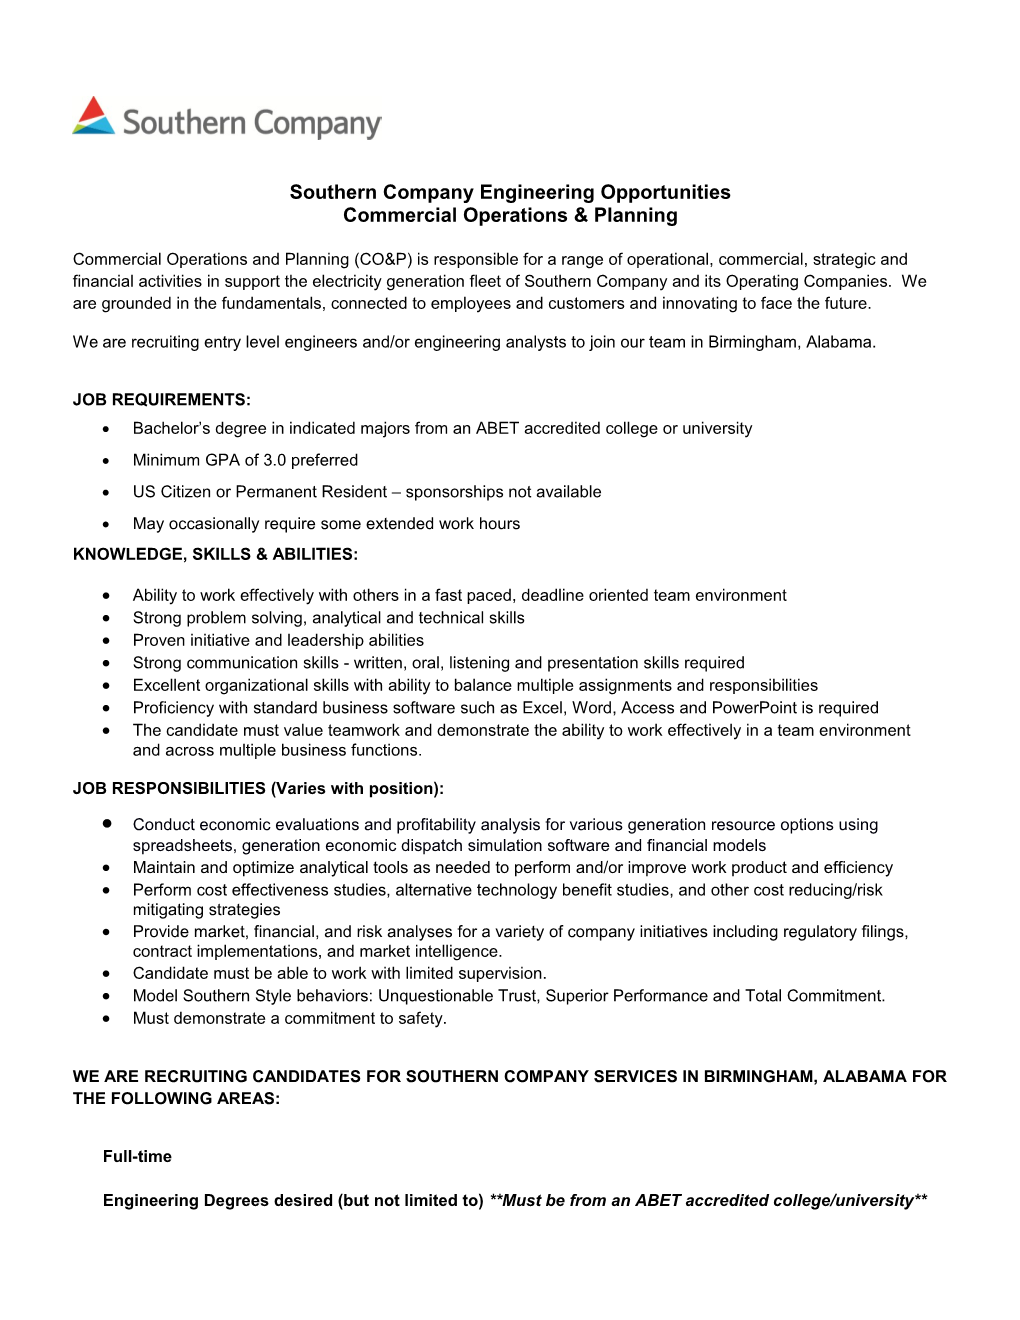 Southern Company Engineering Opportunities